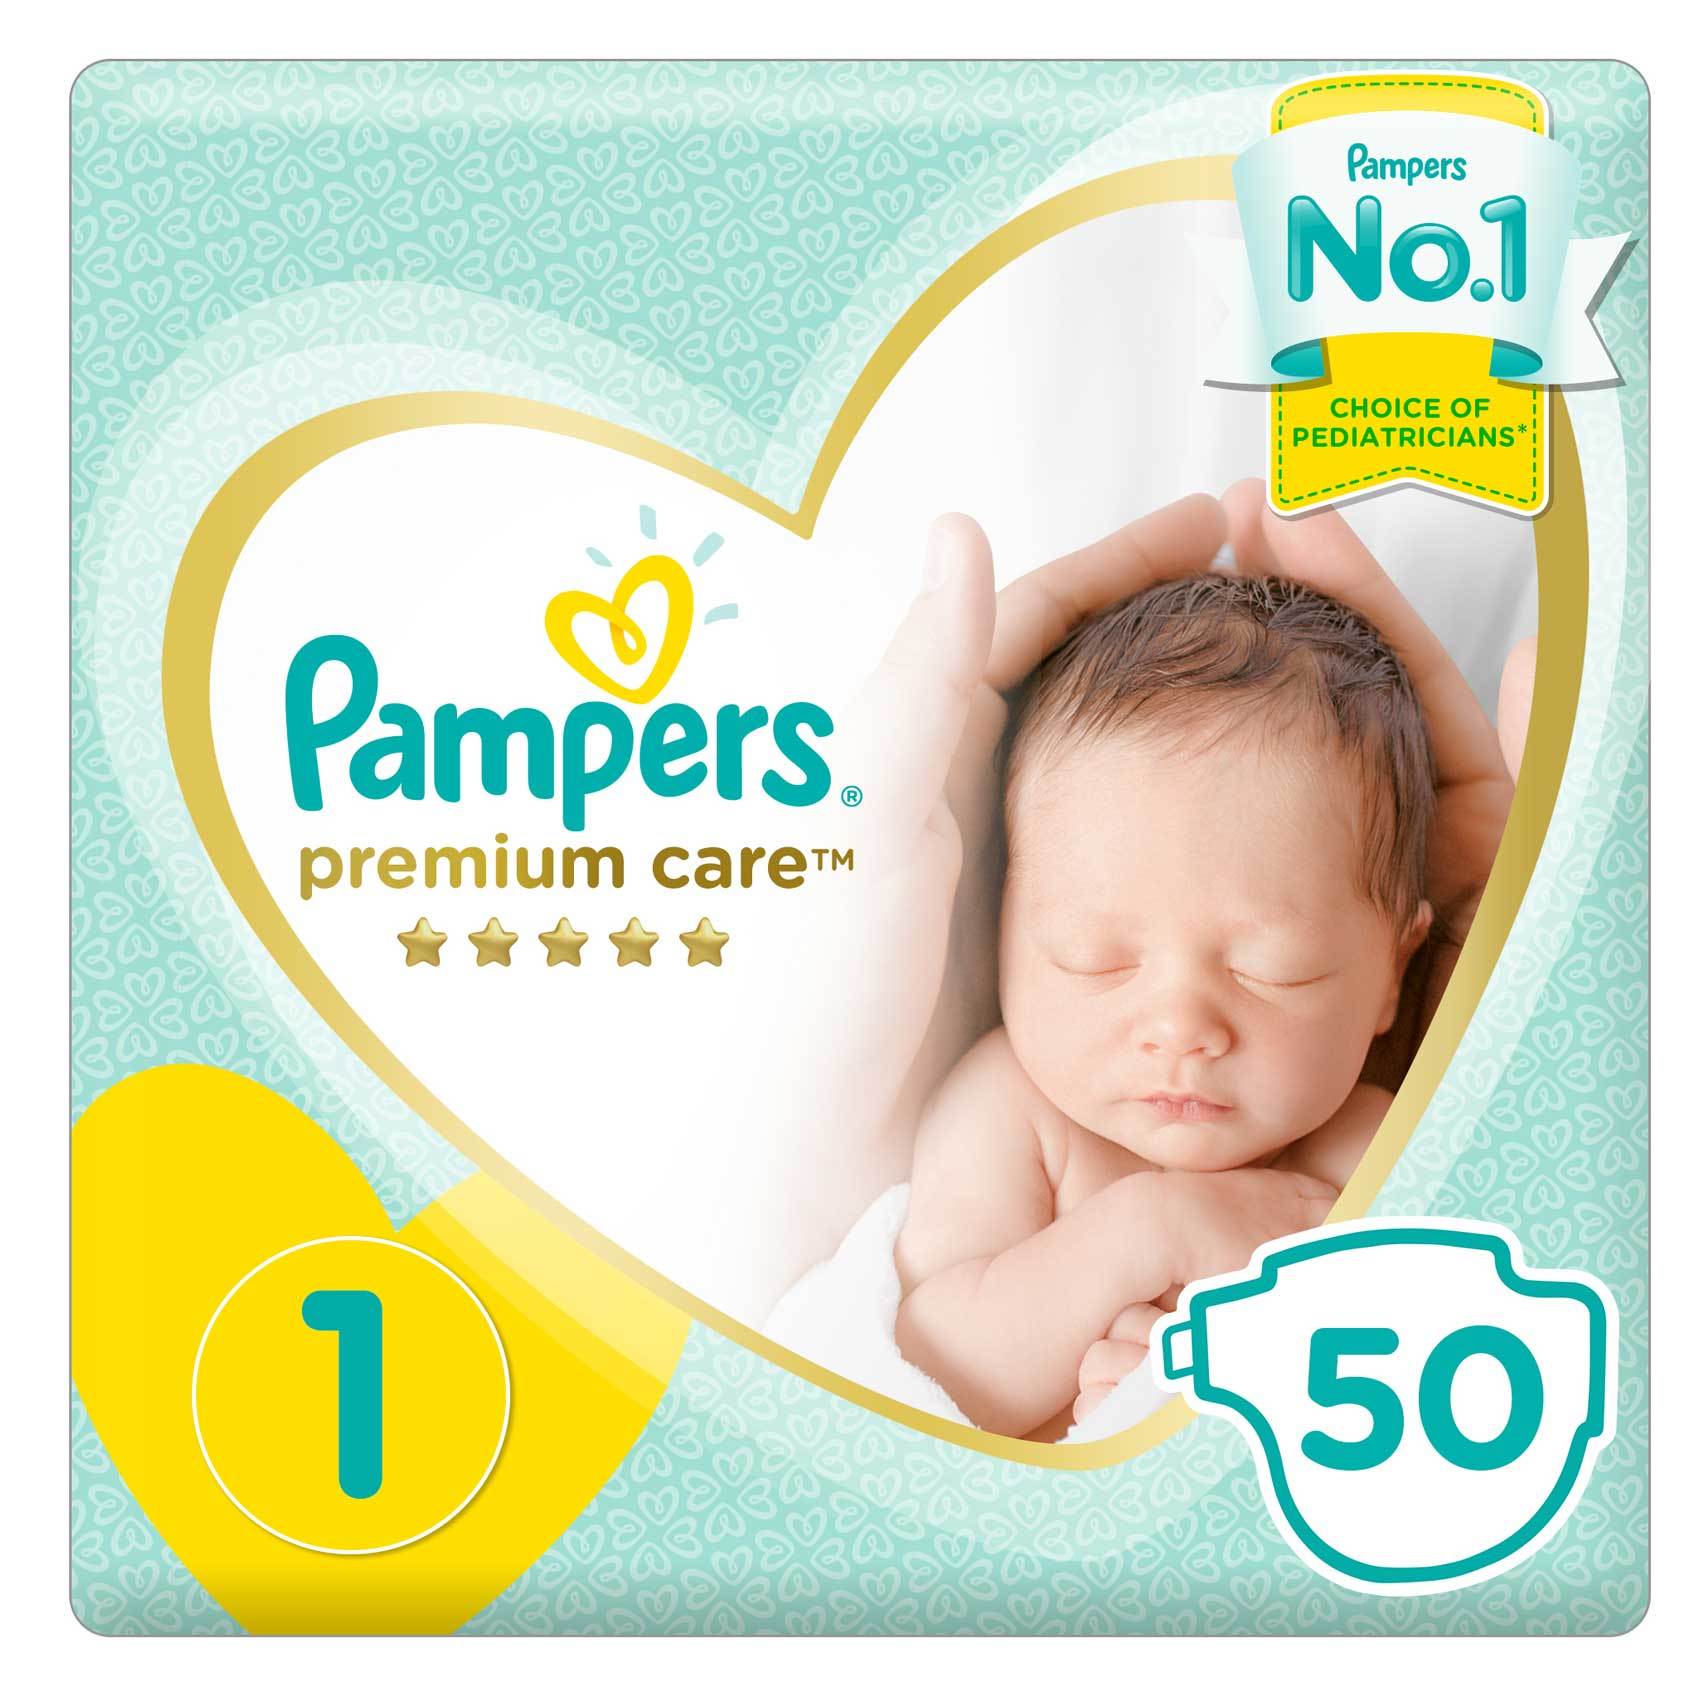 pampers new baby 72 pack